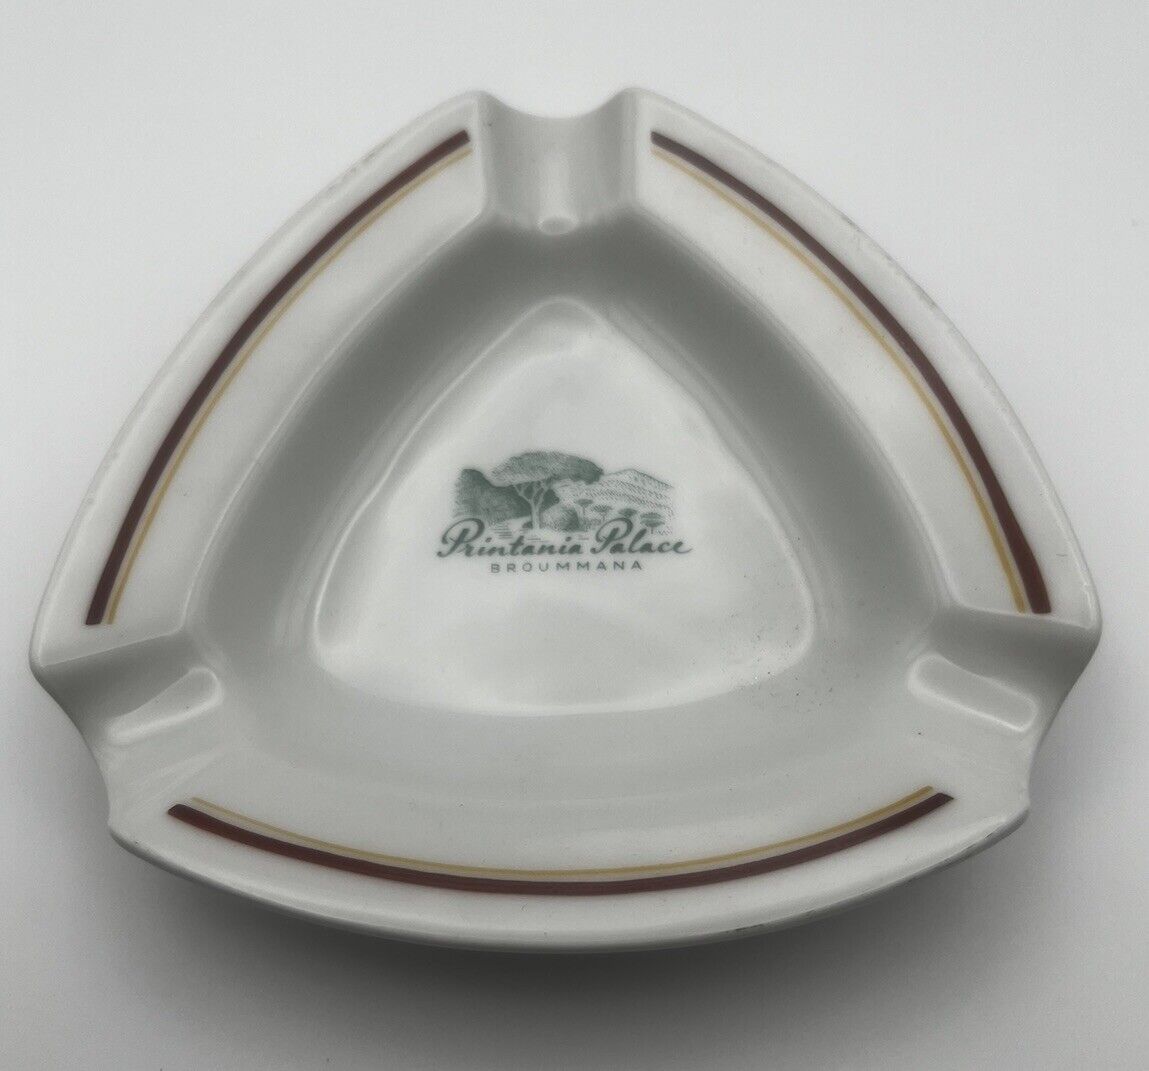 Ashtray From Printania Palace Broummana BAUSCHER WEIDEN Made In Germany